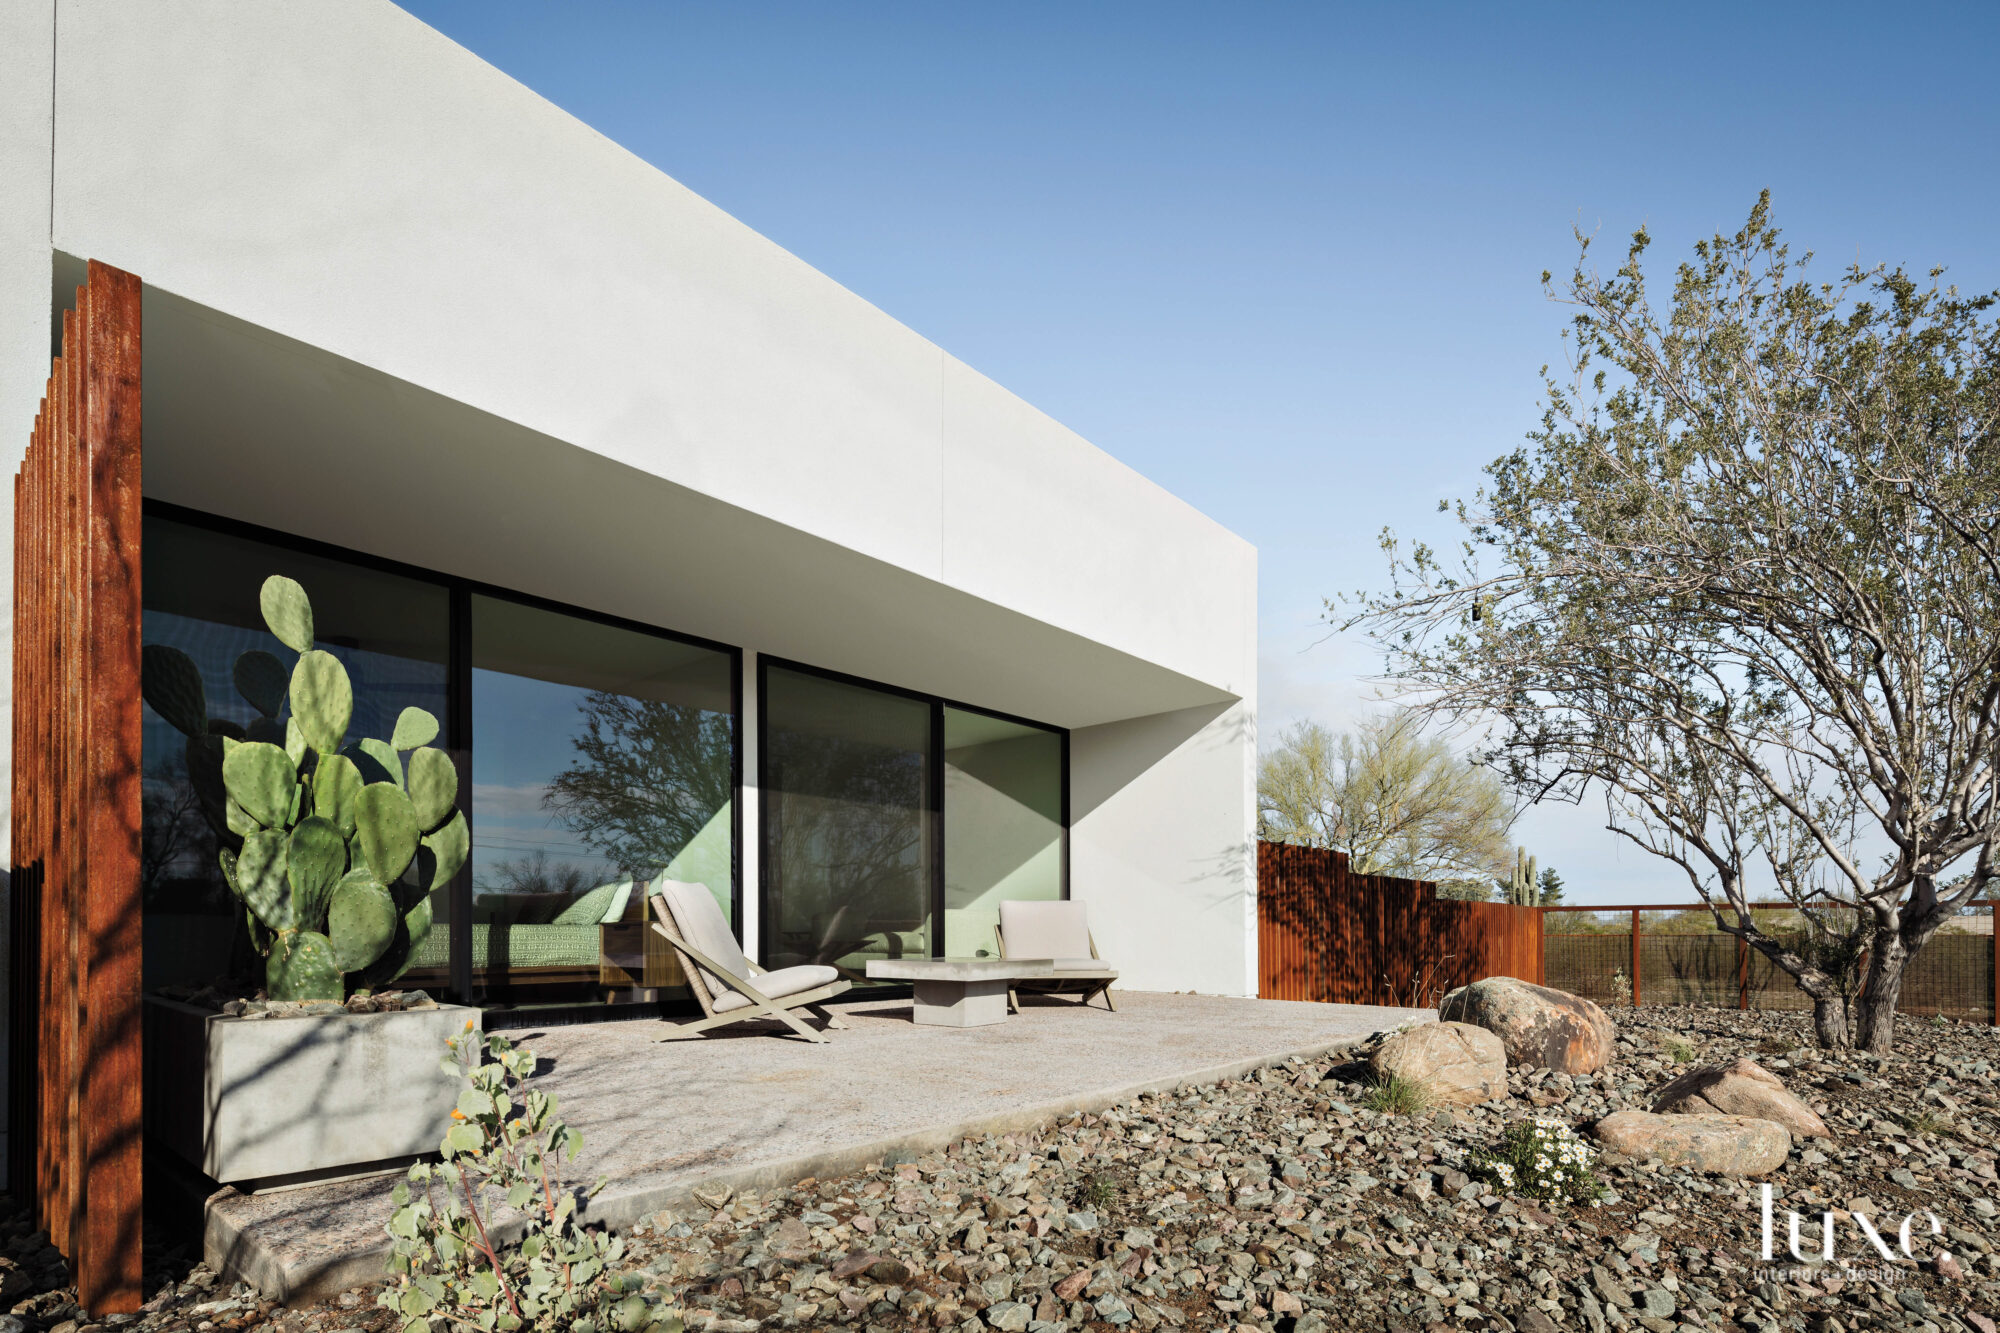 The exterior of the home is comprised of stucco, ipe wood and recessed opening with glass and steel.